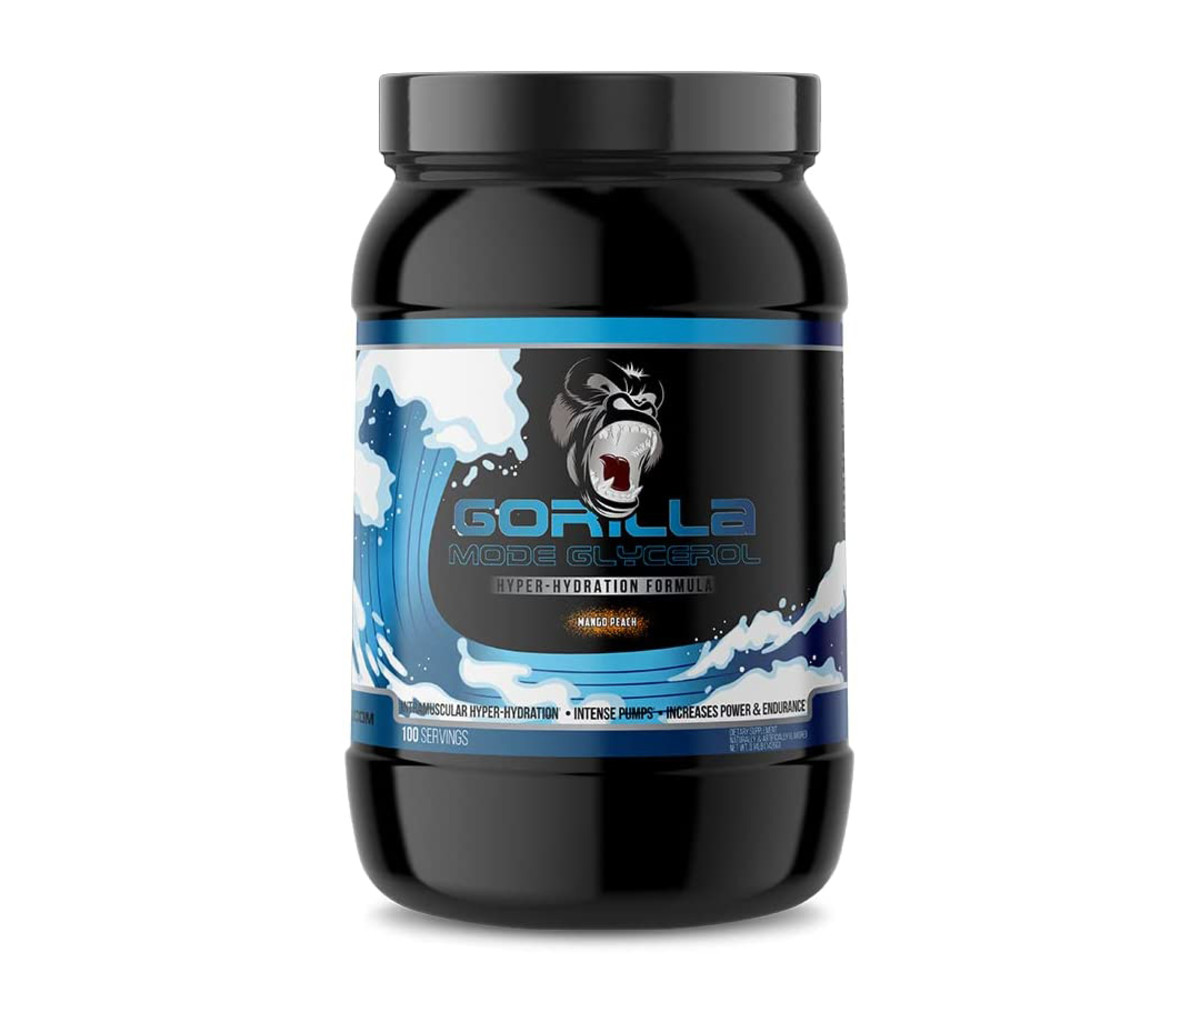 Load Up Before The Gym With The Gorilla Mode Glycerol Pre-Workout - Men's  Journal